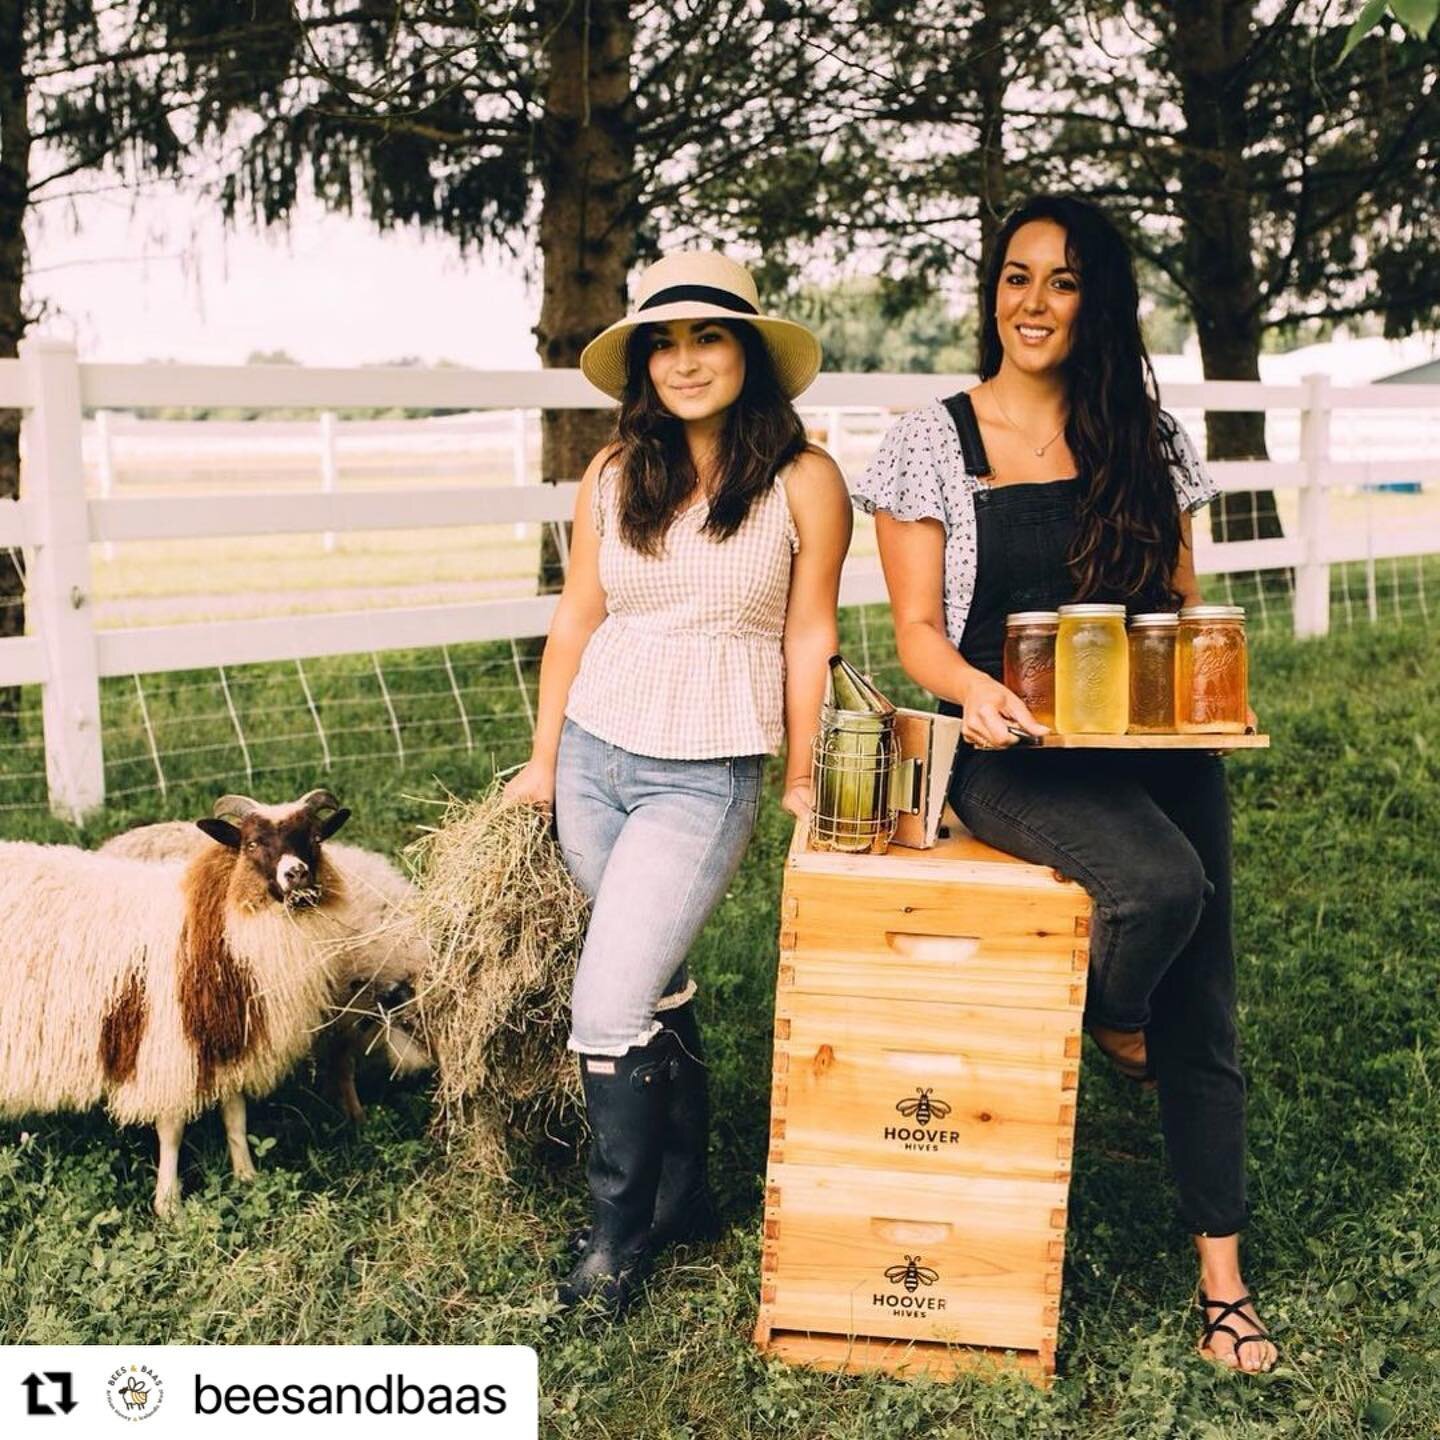 Farm friends are the best! Please follow &amp; support our duck mentor, Julia &amp; her sister Sarah as they embark on an exciting new chapter! We sure love the sound of it!
#Repost @beesandbaas with @make_repost
・・・
I&rsquo;m so excited to finally b